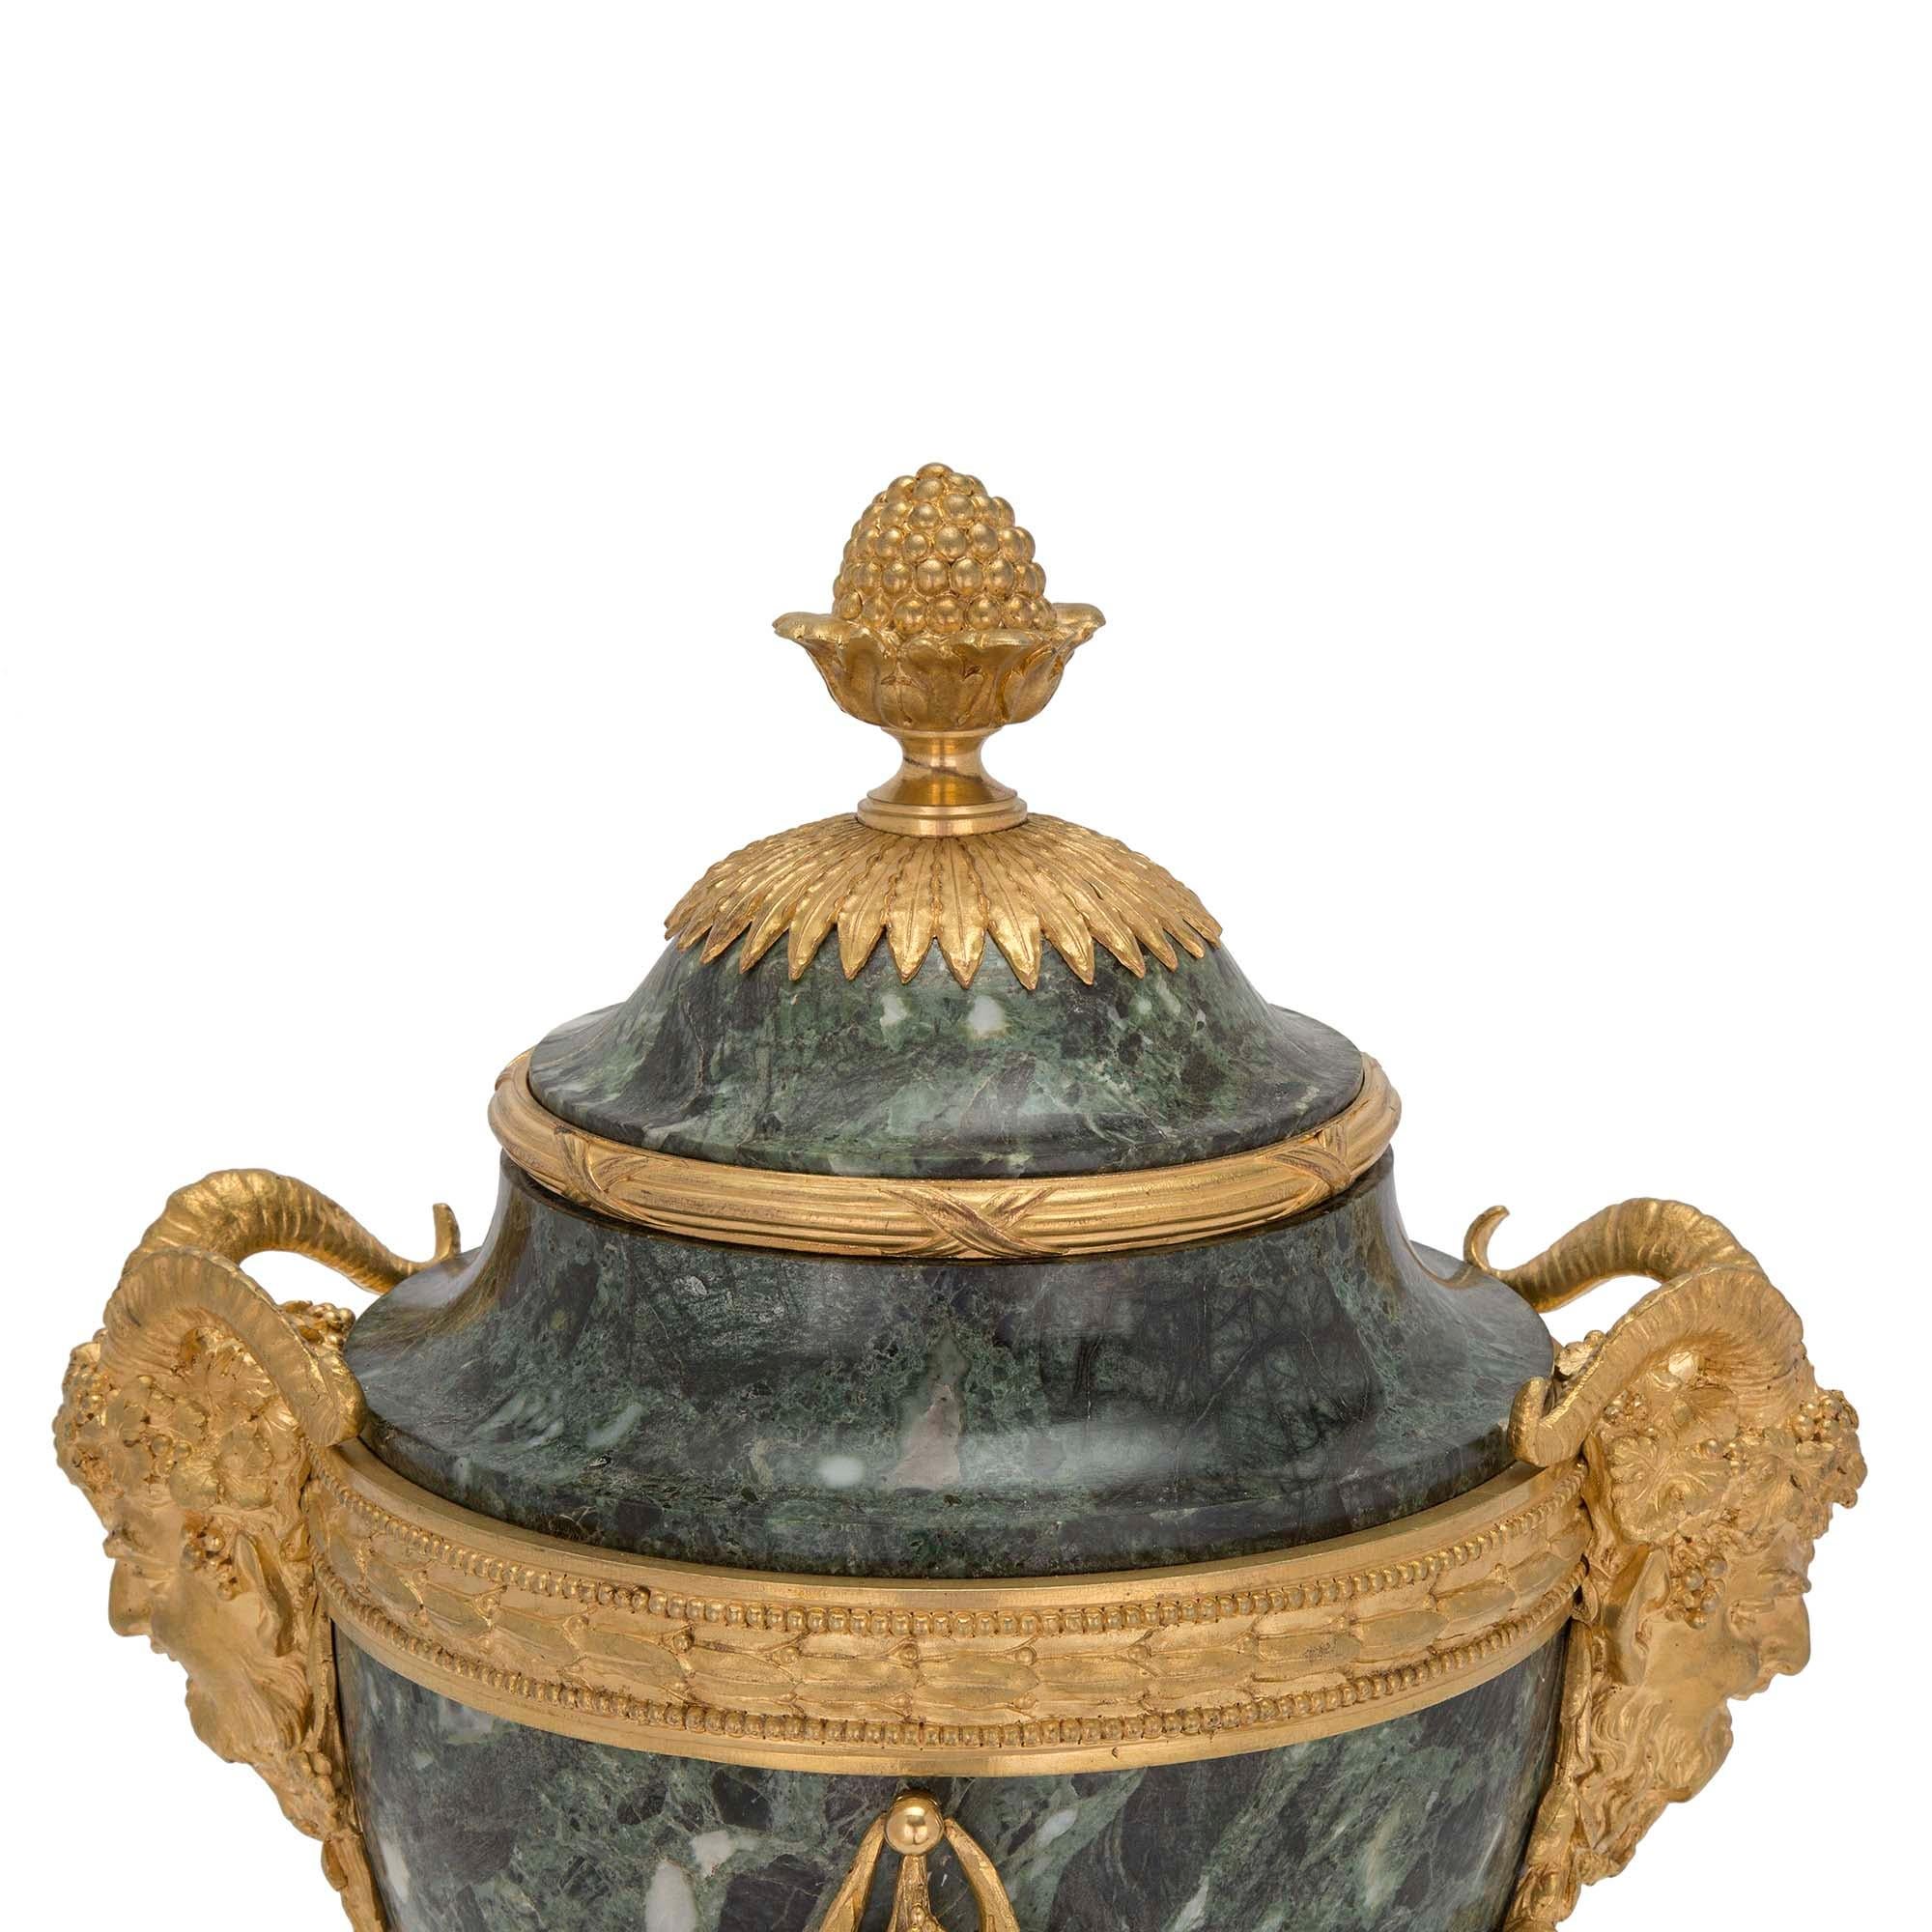 French 19th Century Louis XVI St. Belle Époque Period Vert Antique Marble Urns In Good Condition For Sale In West Palm Beach, FL